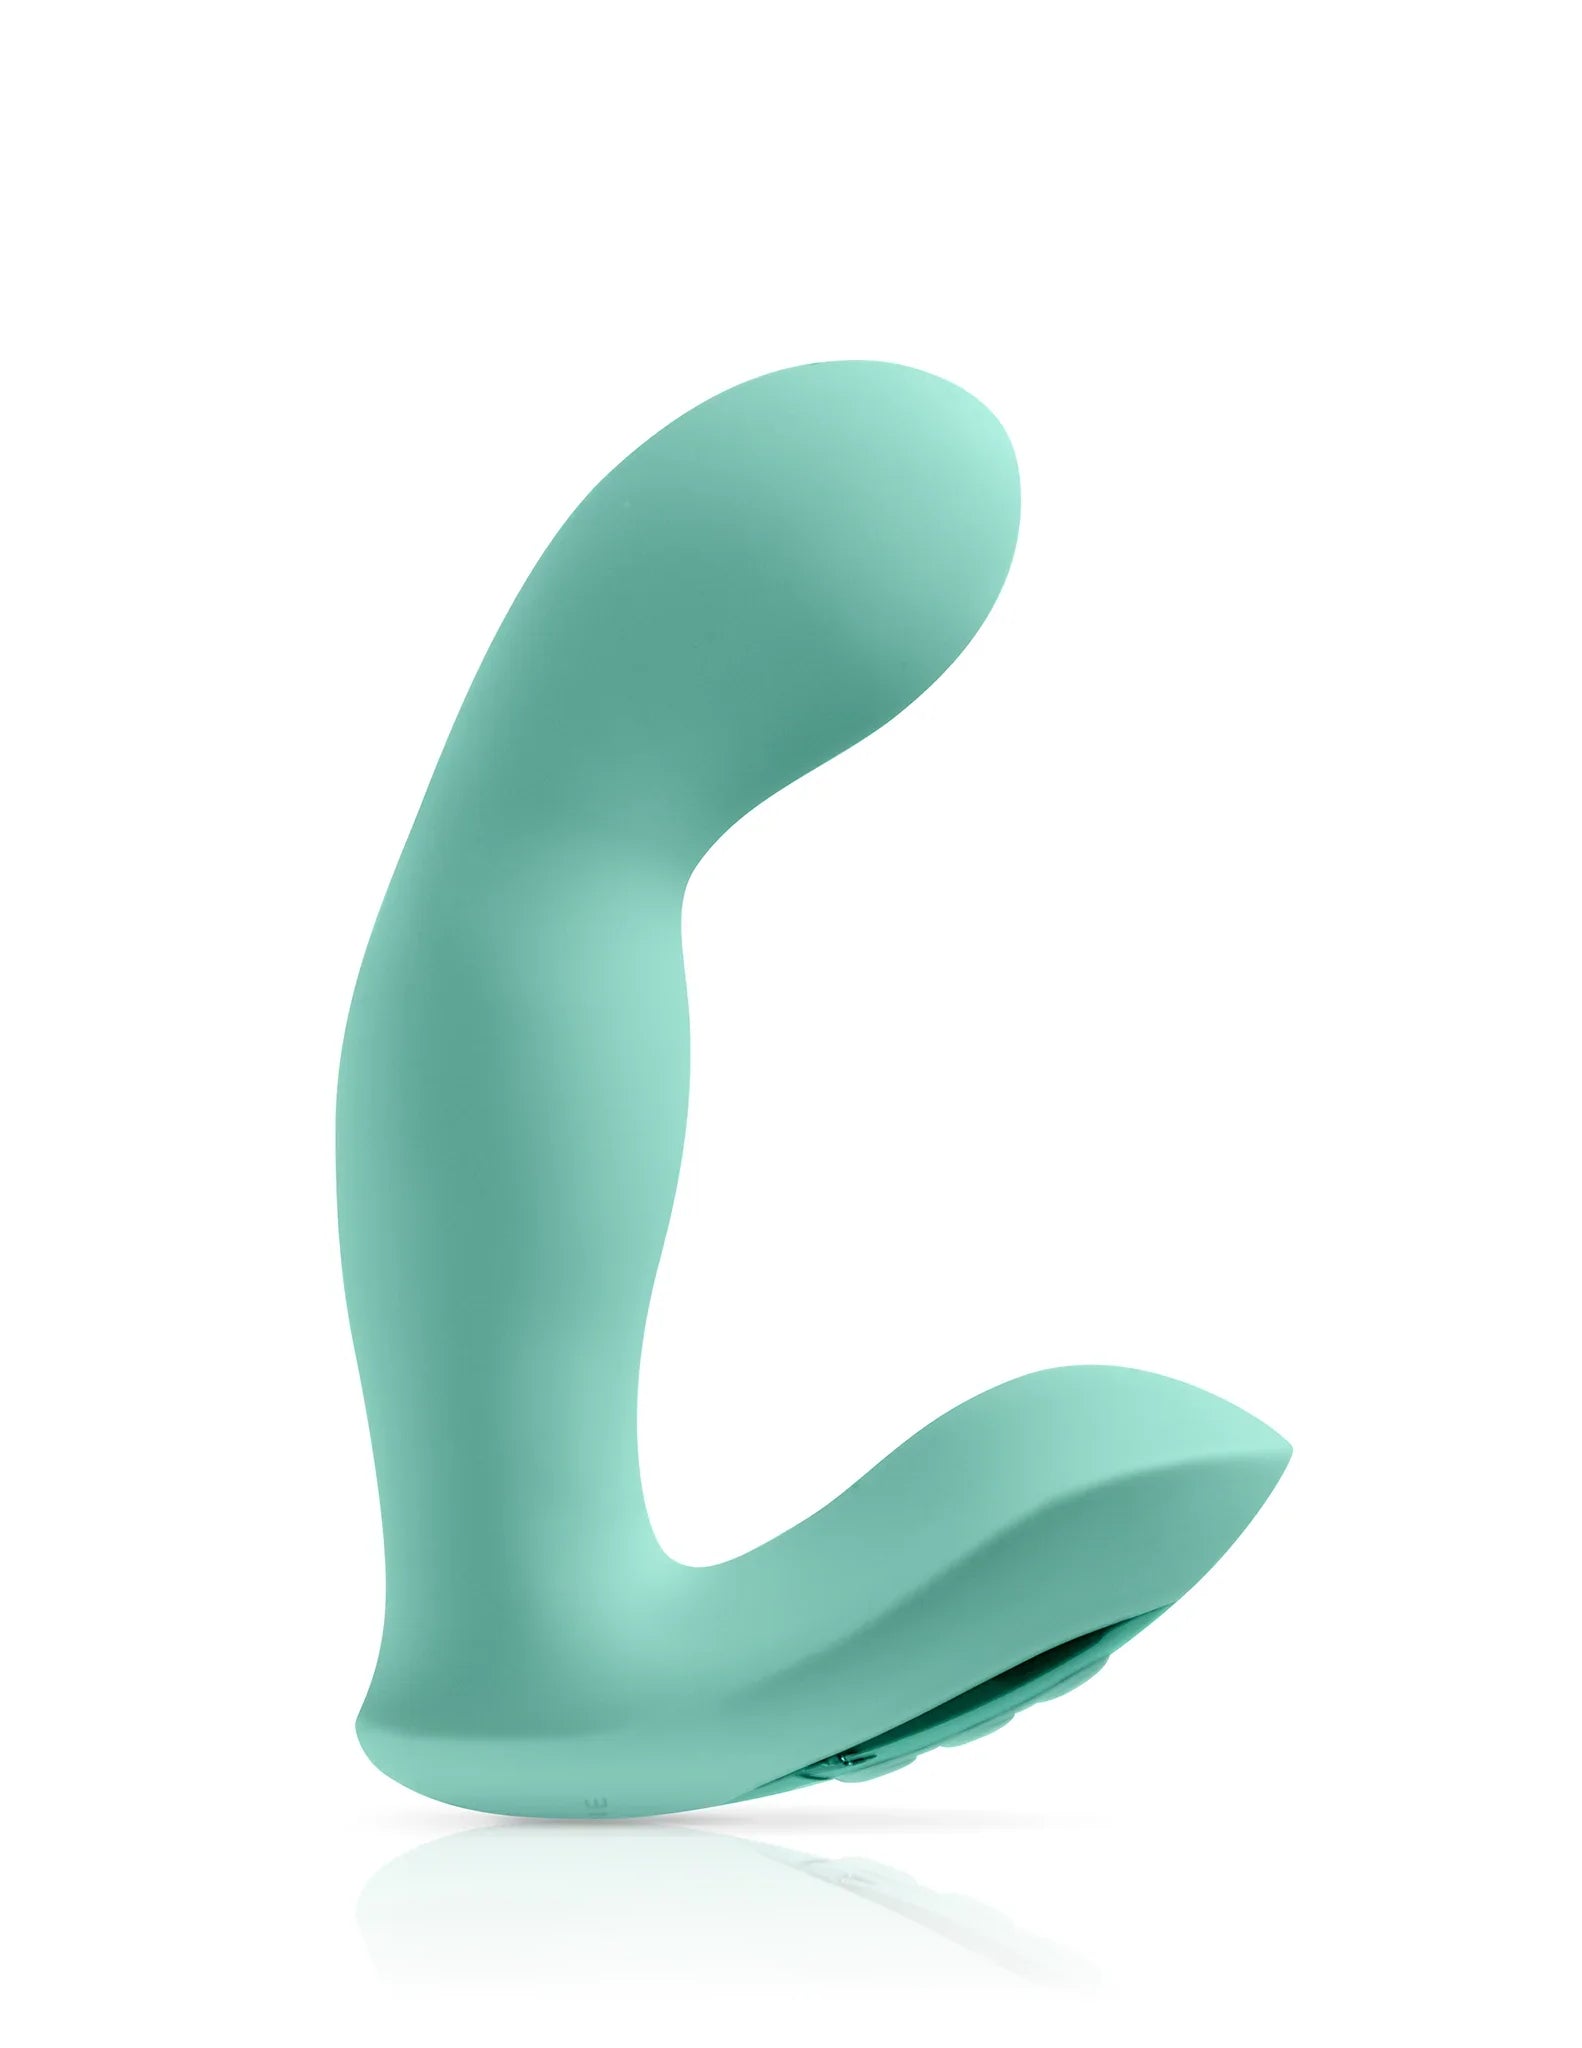 Pulsus G-Spot Vibrator for women green color side picture